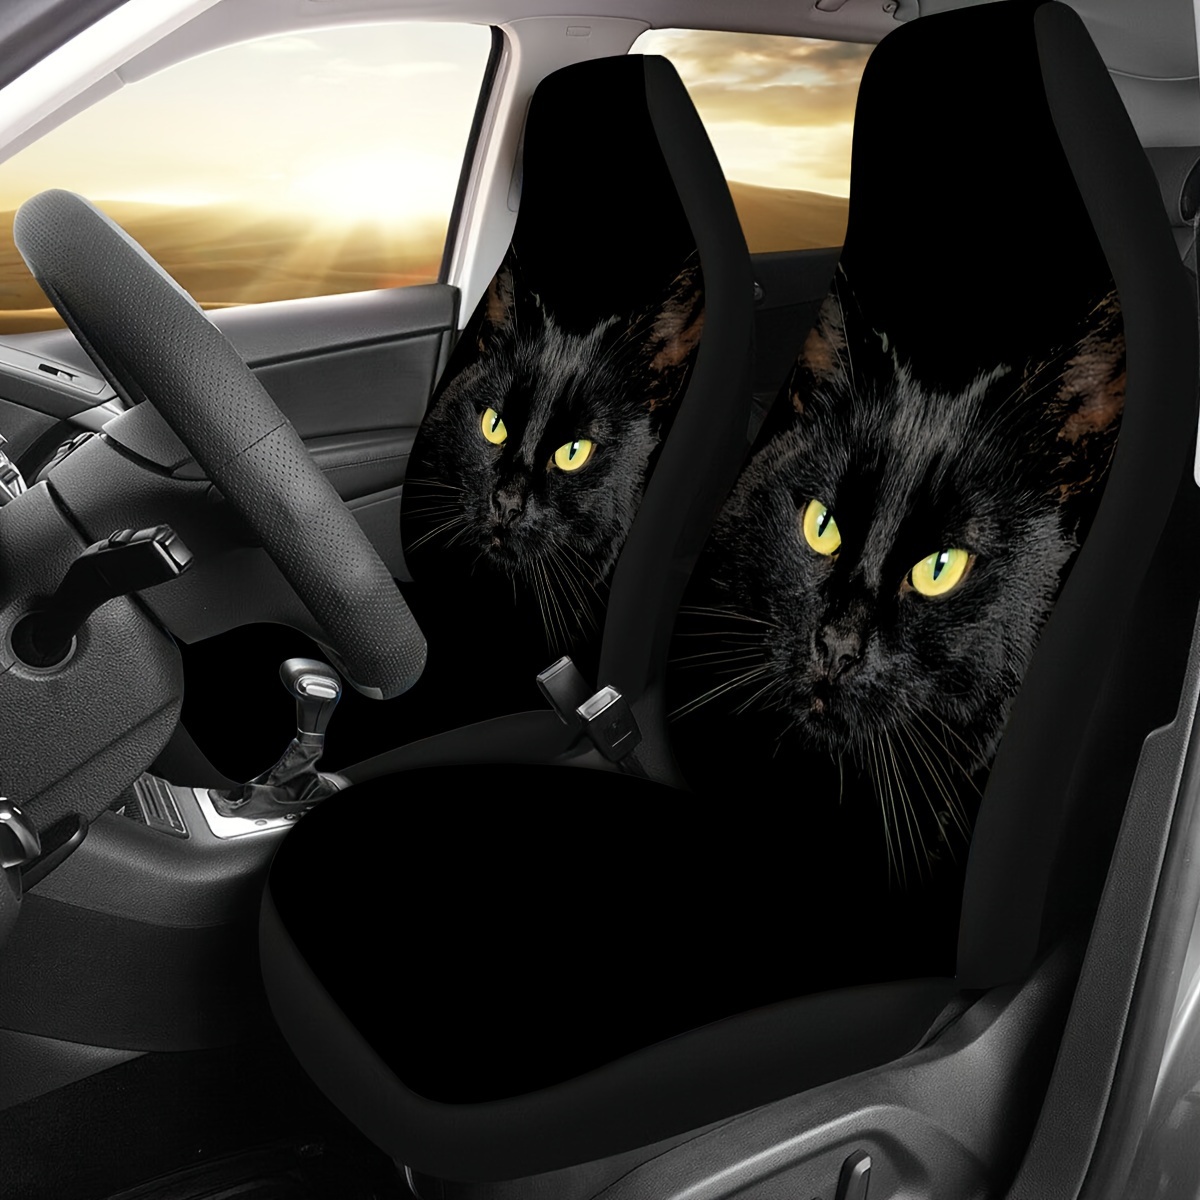 

1pc Black Cat Print Car Seat Cover, Ice Silk Fabric, Universal Fit For Most Car And Suv Bucket Style Seats, Durable & Comfortable, Stylish Protection For Vehicle Interior